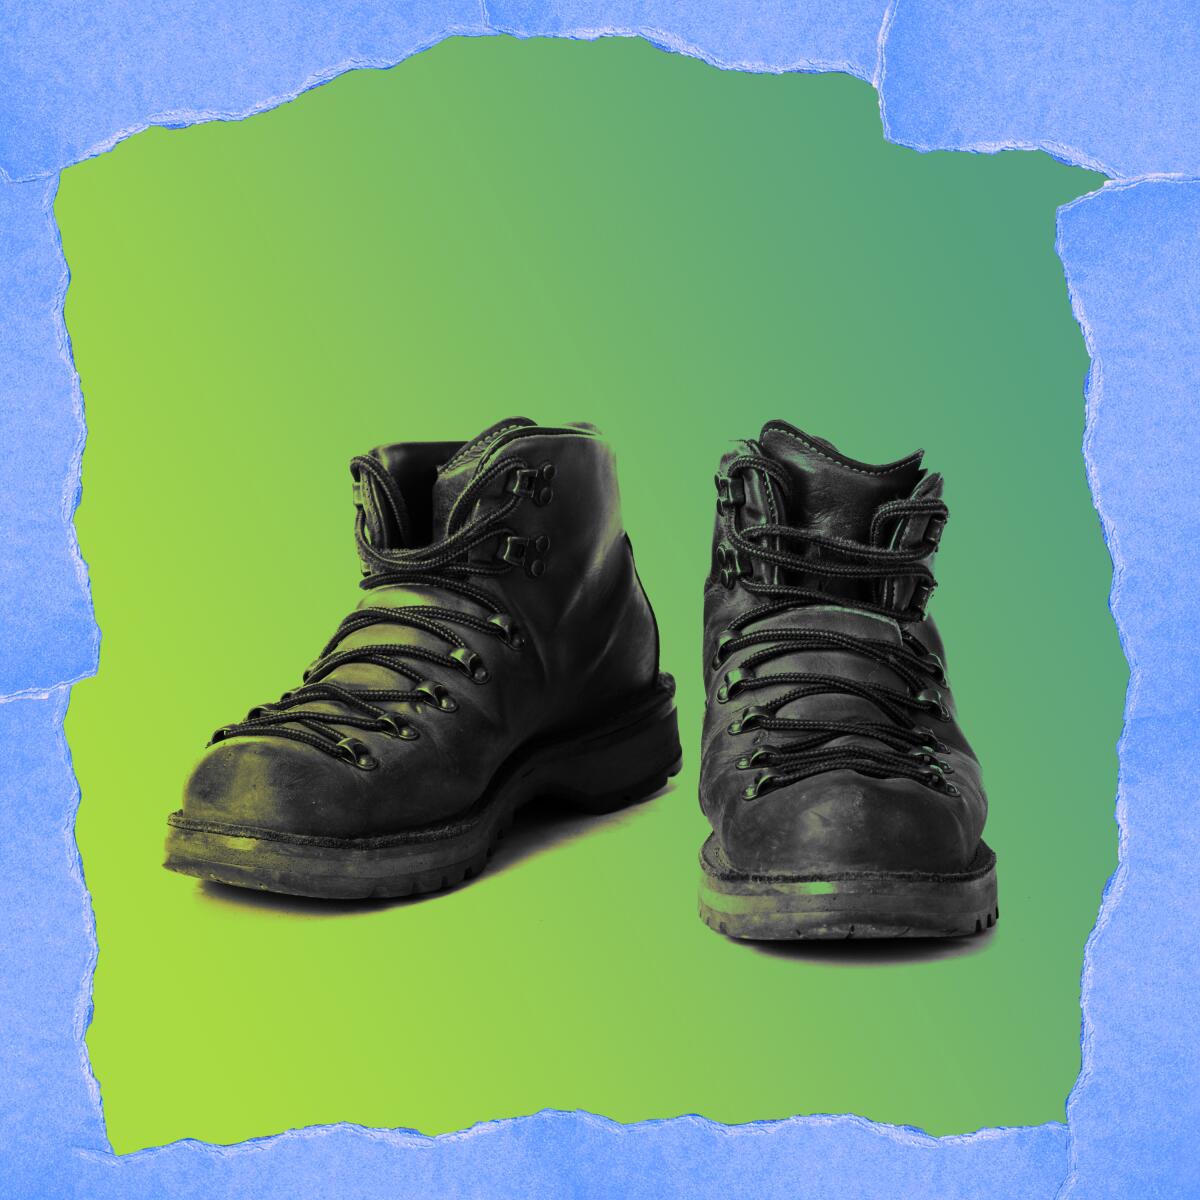 Boots on a greenish background